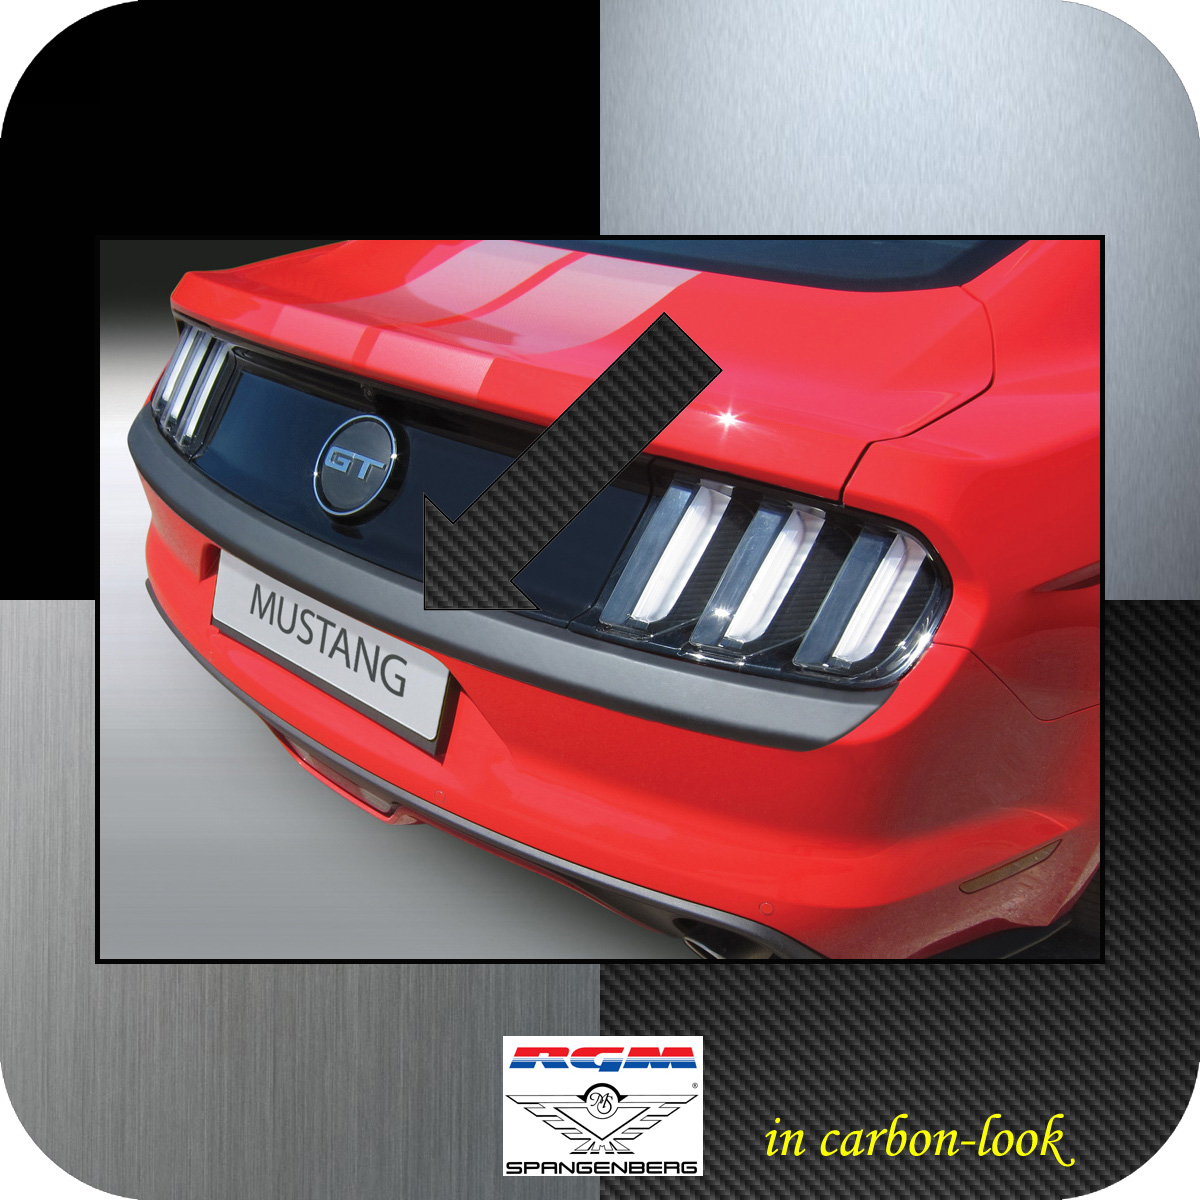 Ladekantenschutz Carbon-Look lang Ford Mustang VI Coupe & Cabrio 2015-17 3509668